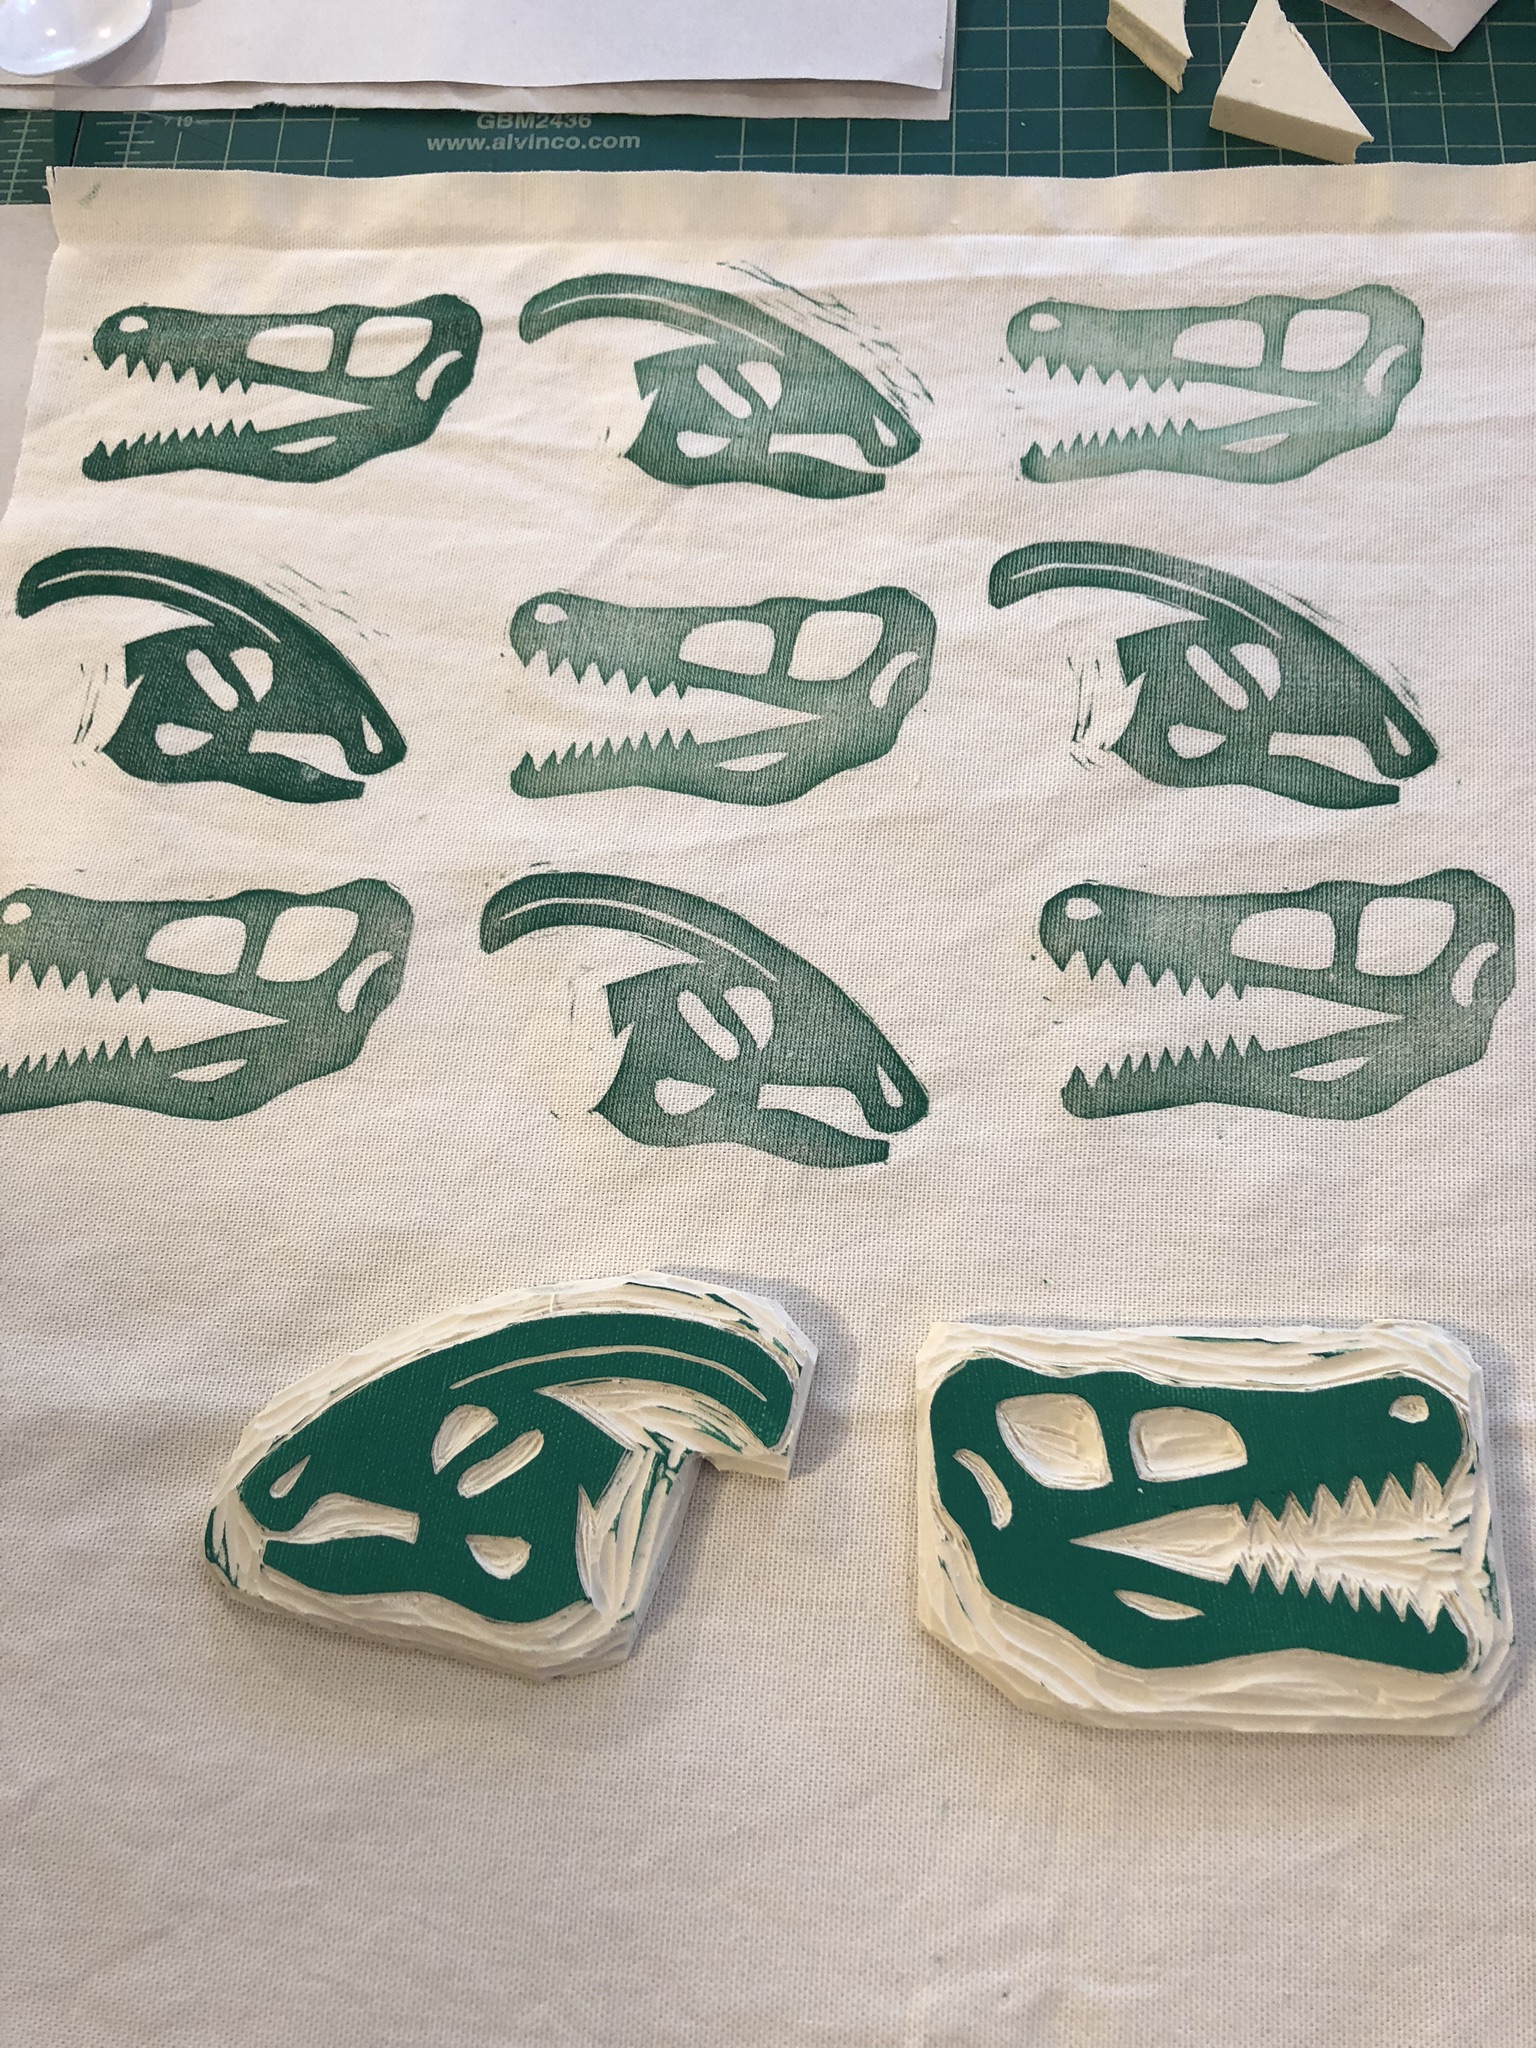 Hand-carved stamps of dinosaur skulls and the fabric they have printed.